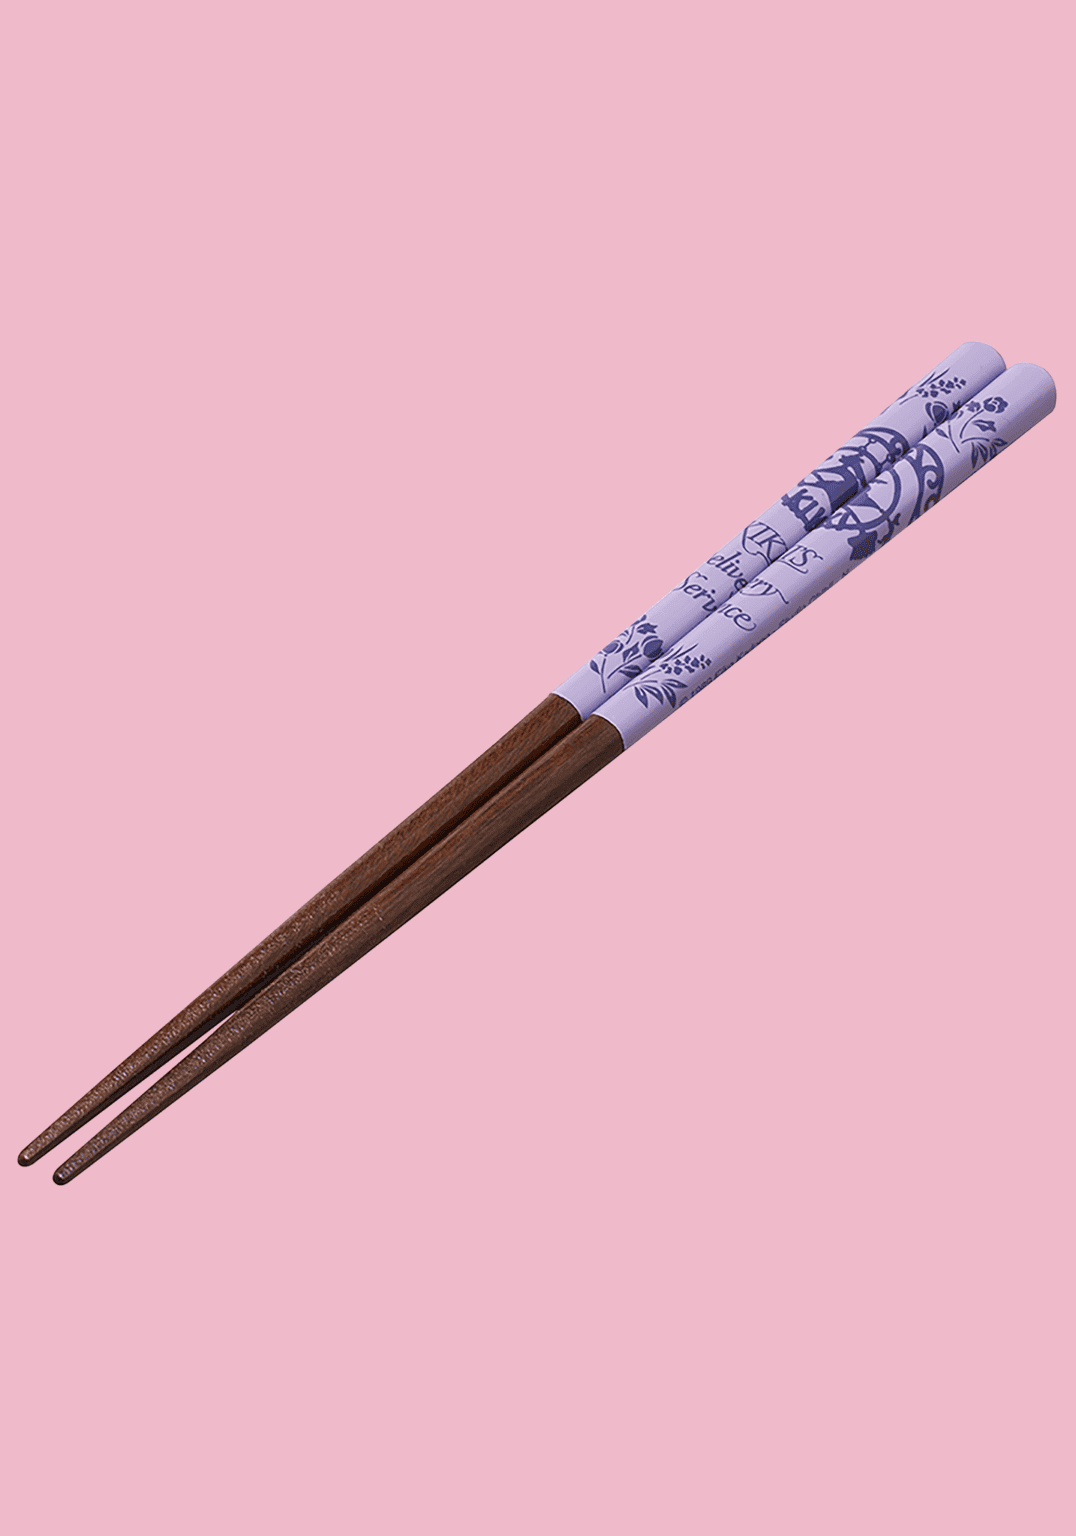 Clever Idiots Kiki’s Delivery Service Wooden Chopsticks Kawaii Gifts